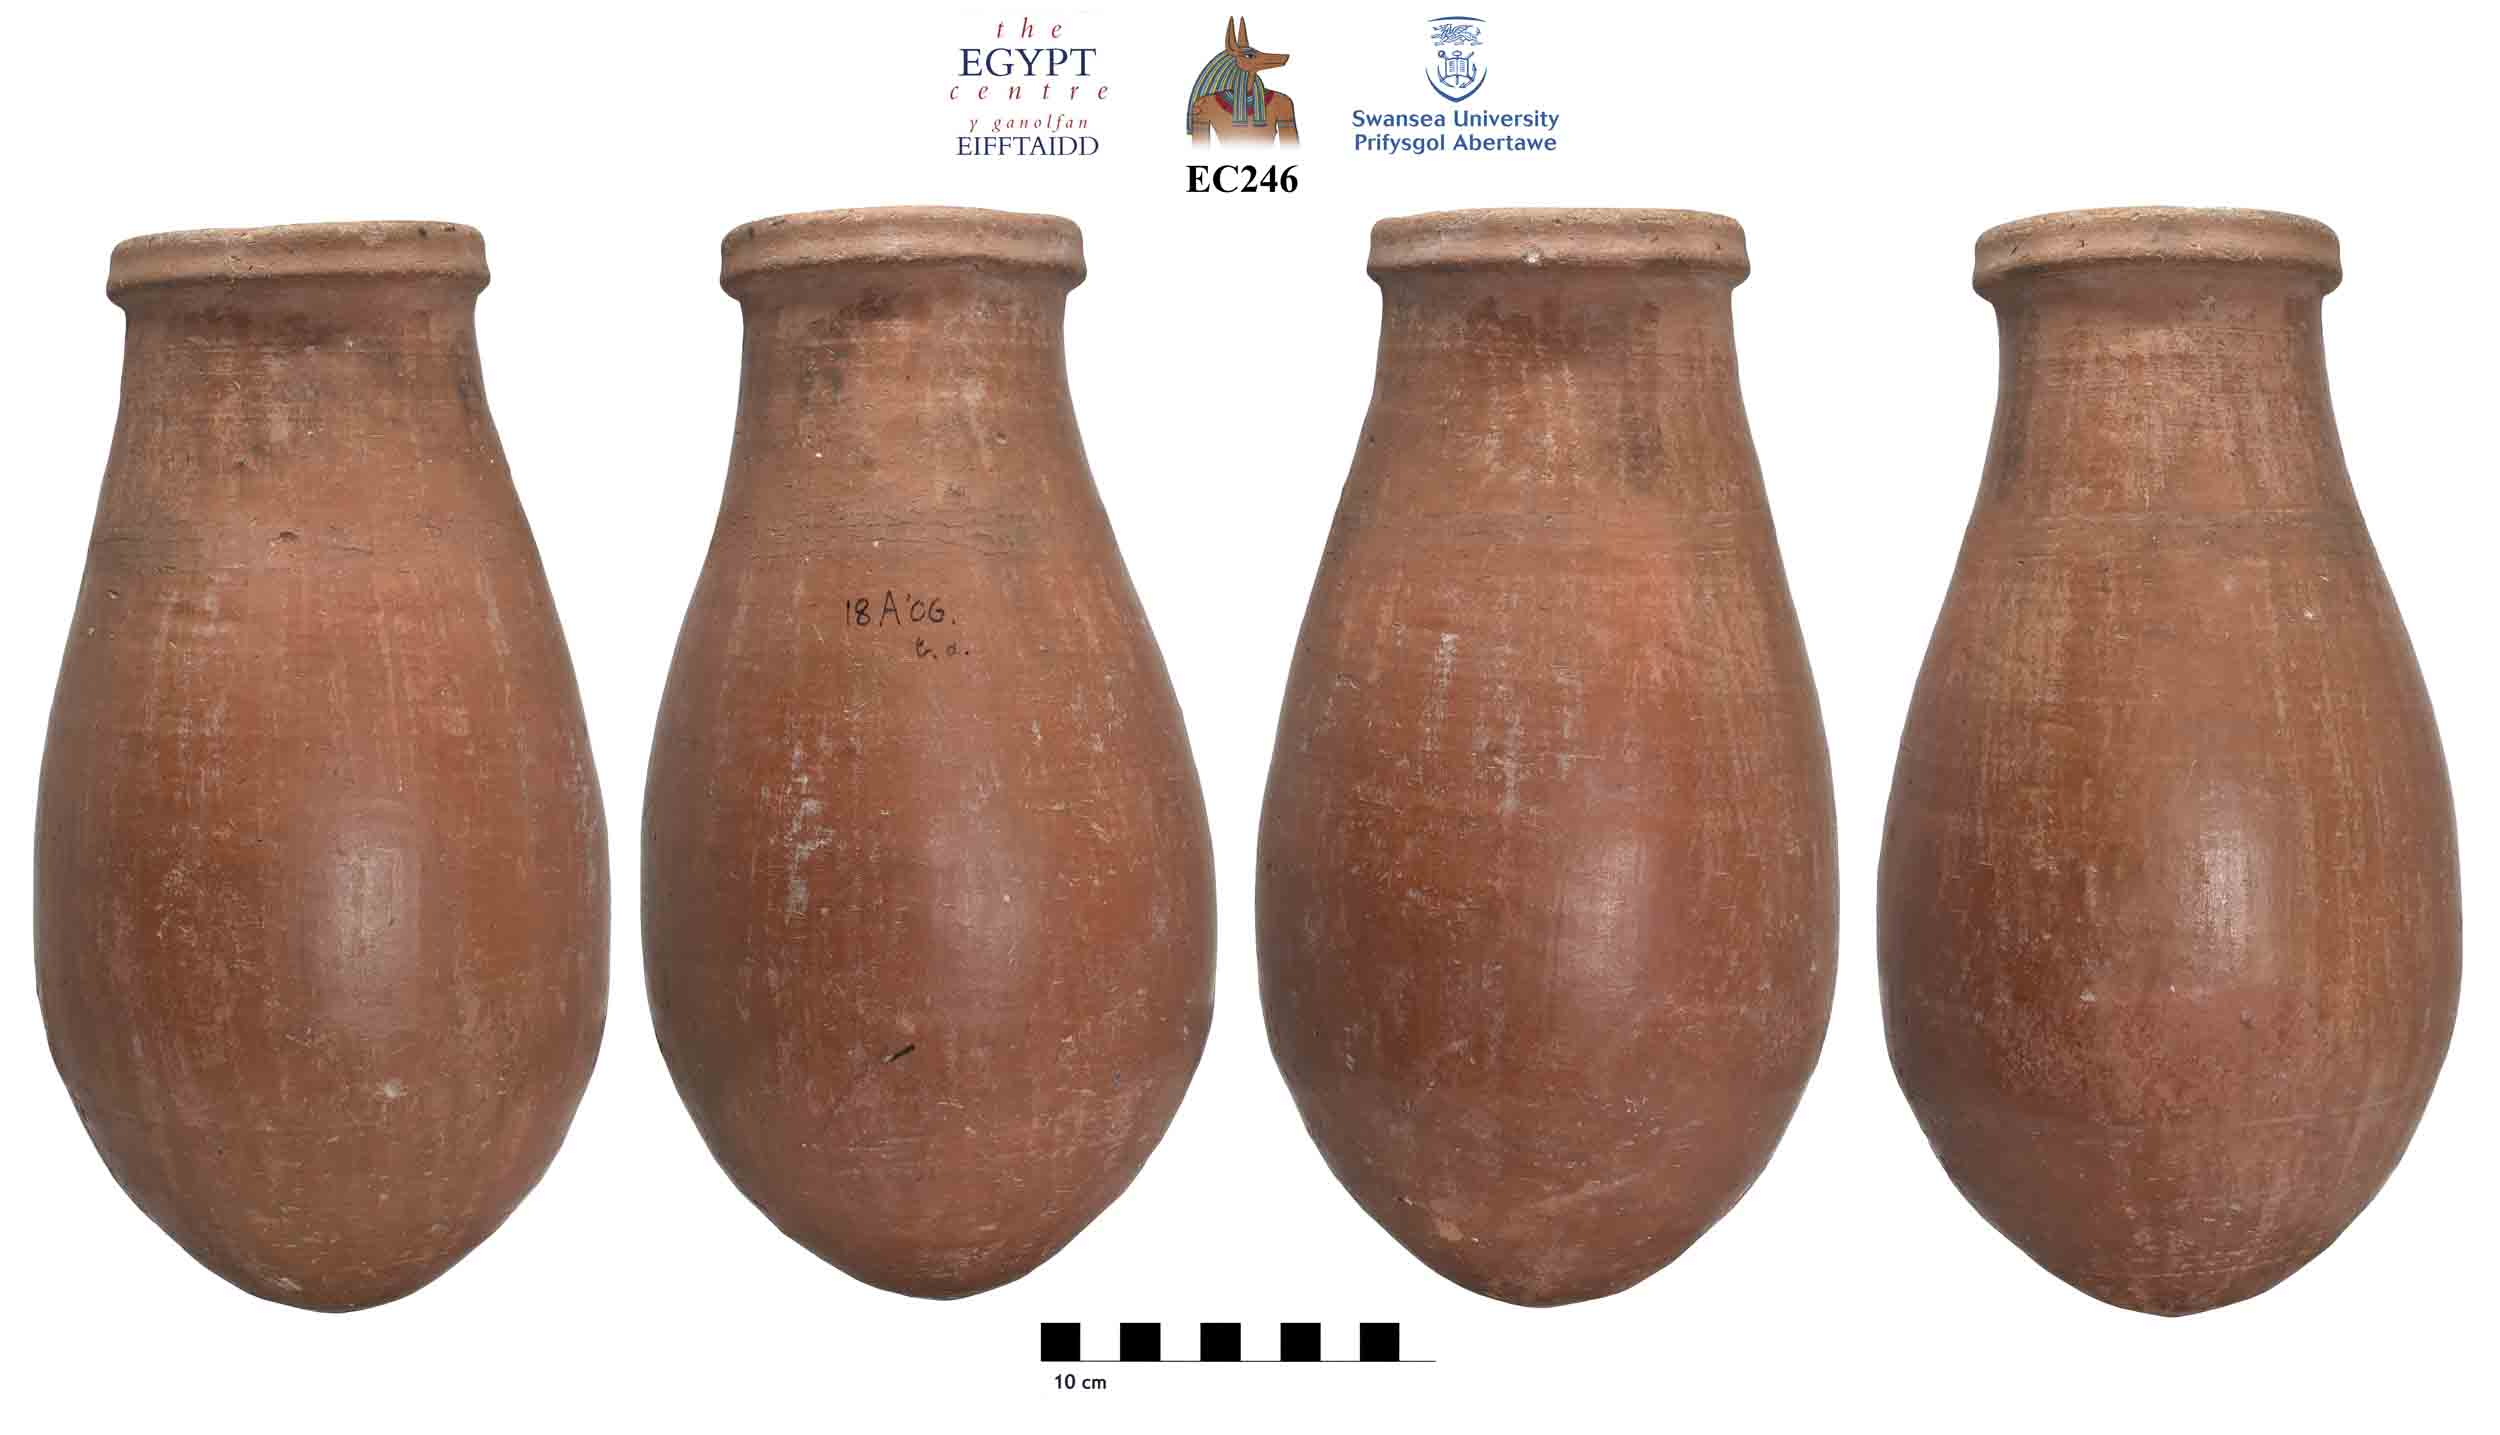 Image for: Pottery vessel